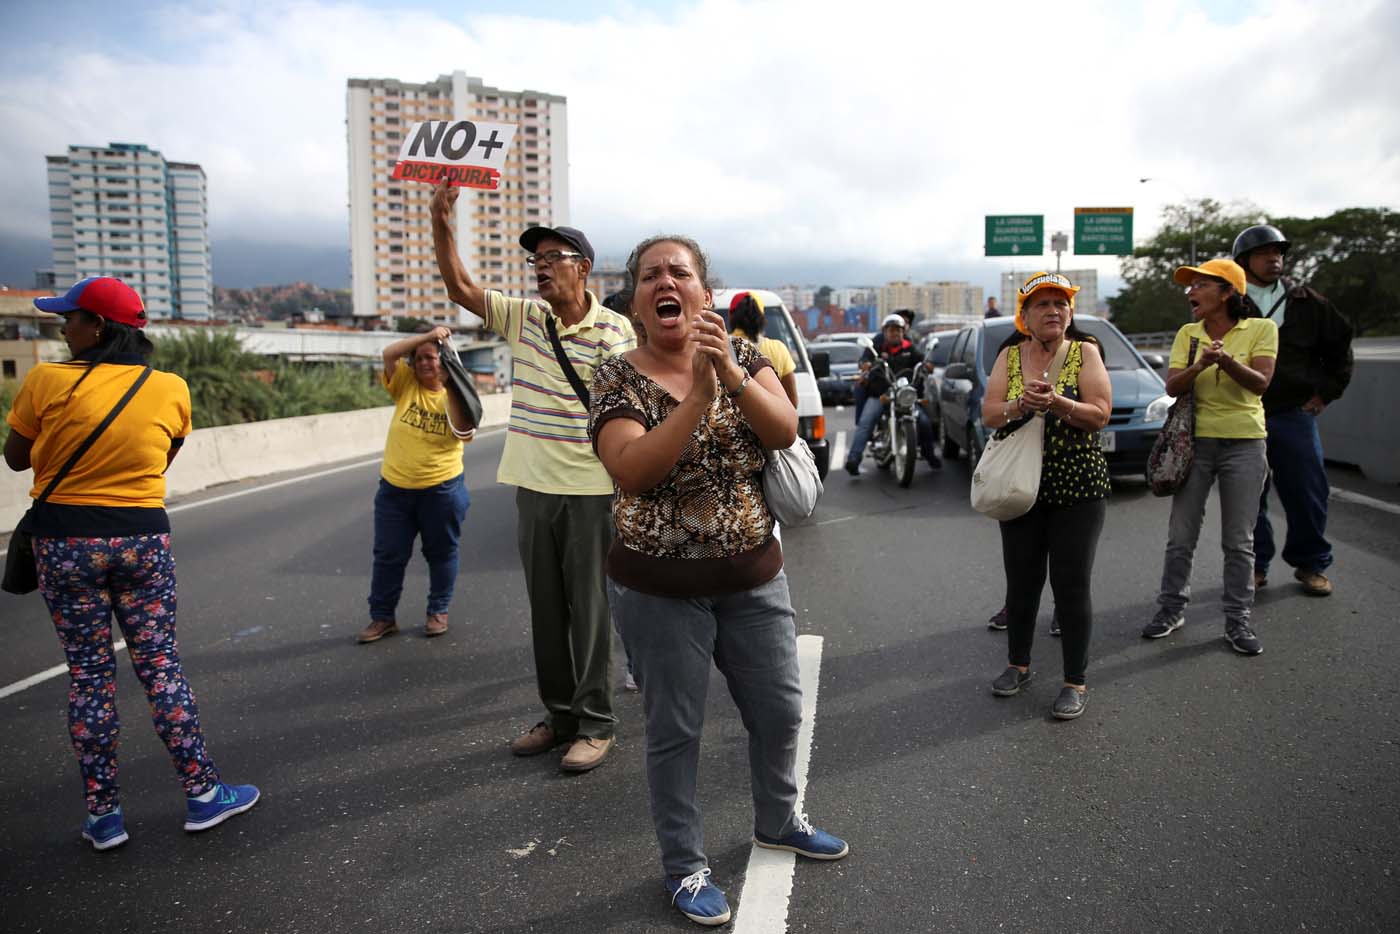 Opposition supporters holding a placard that reads, "No more dictatorship" shout slogans as they block a highway during a protest against Venezuelan President Nicolas Maduro's government in Caracas, Venezuela March 31, 2017. REUTERS/Carlos Garcia Rawlins